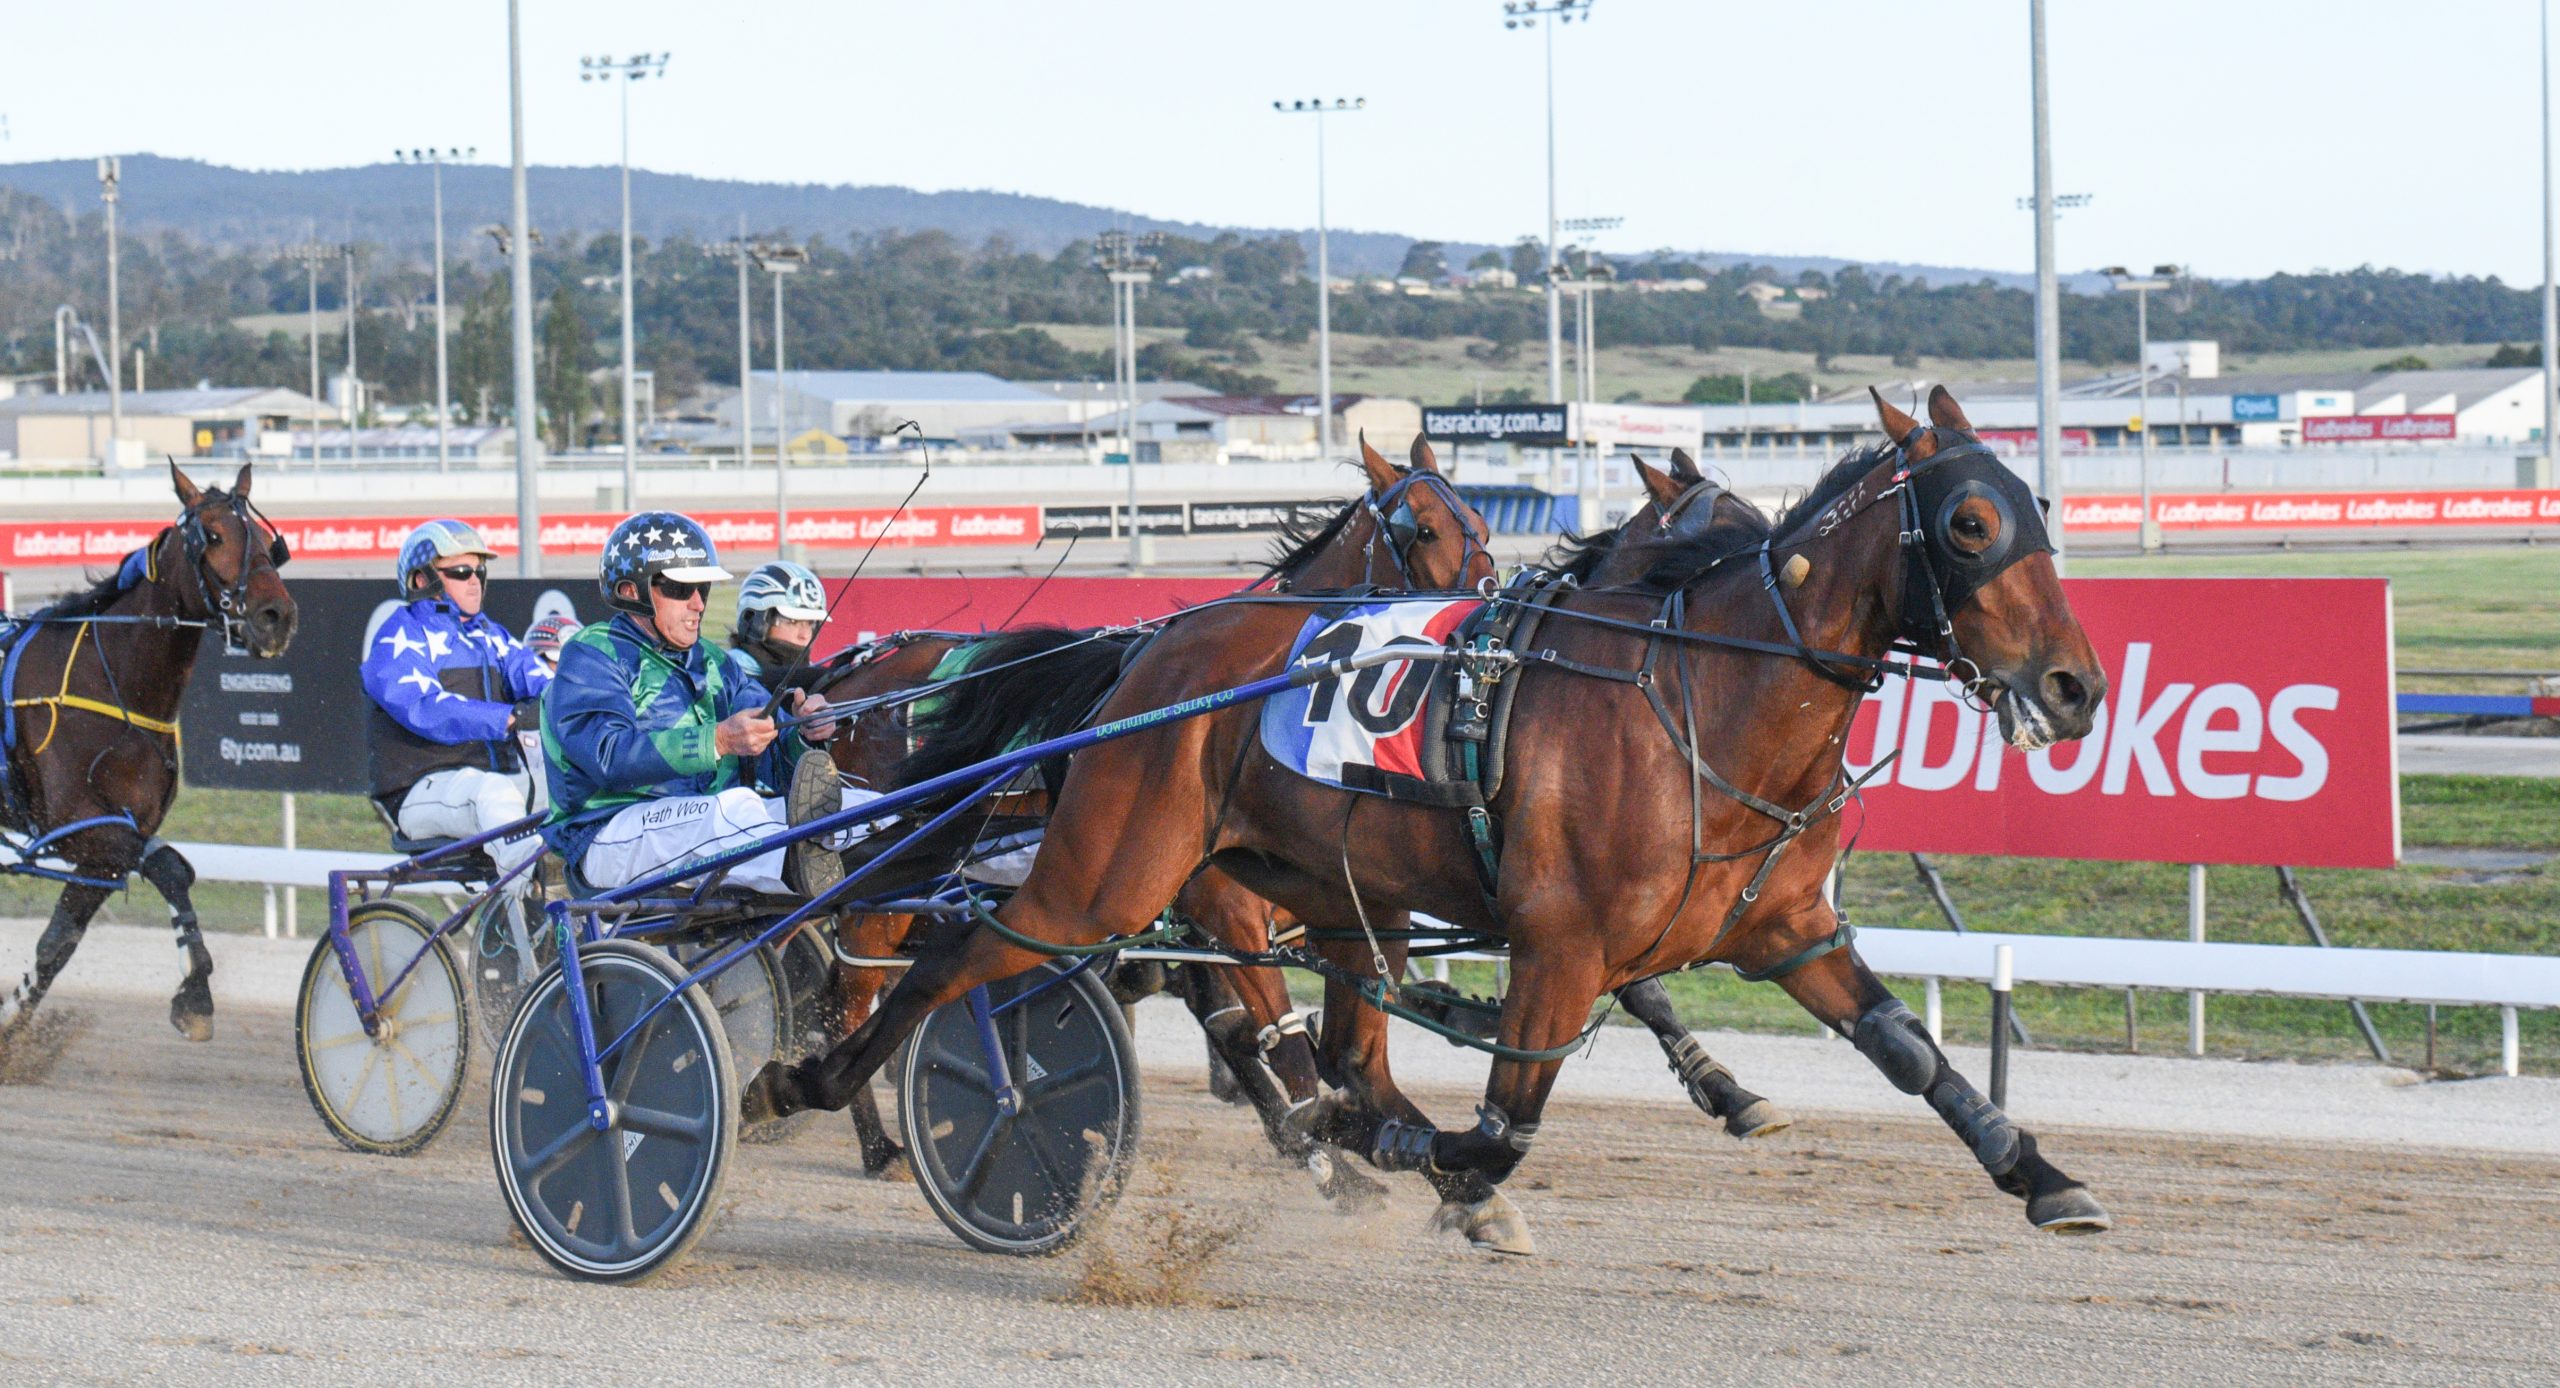 Who will be crowded Tasmania’s harness racings best from the 2021 season?